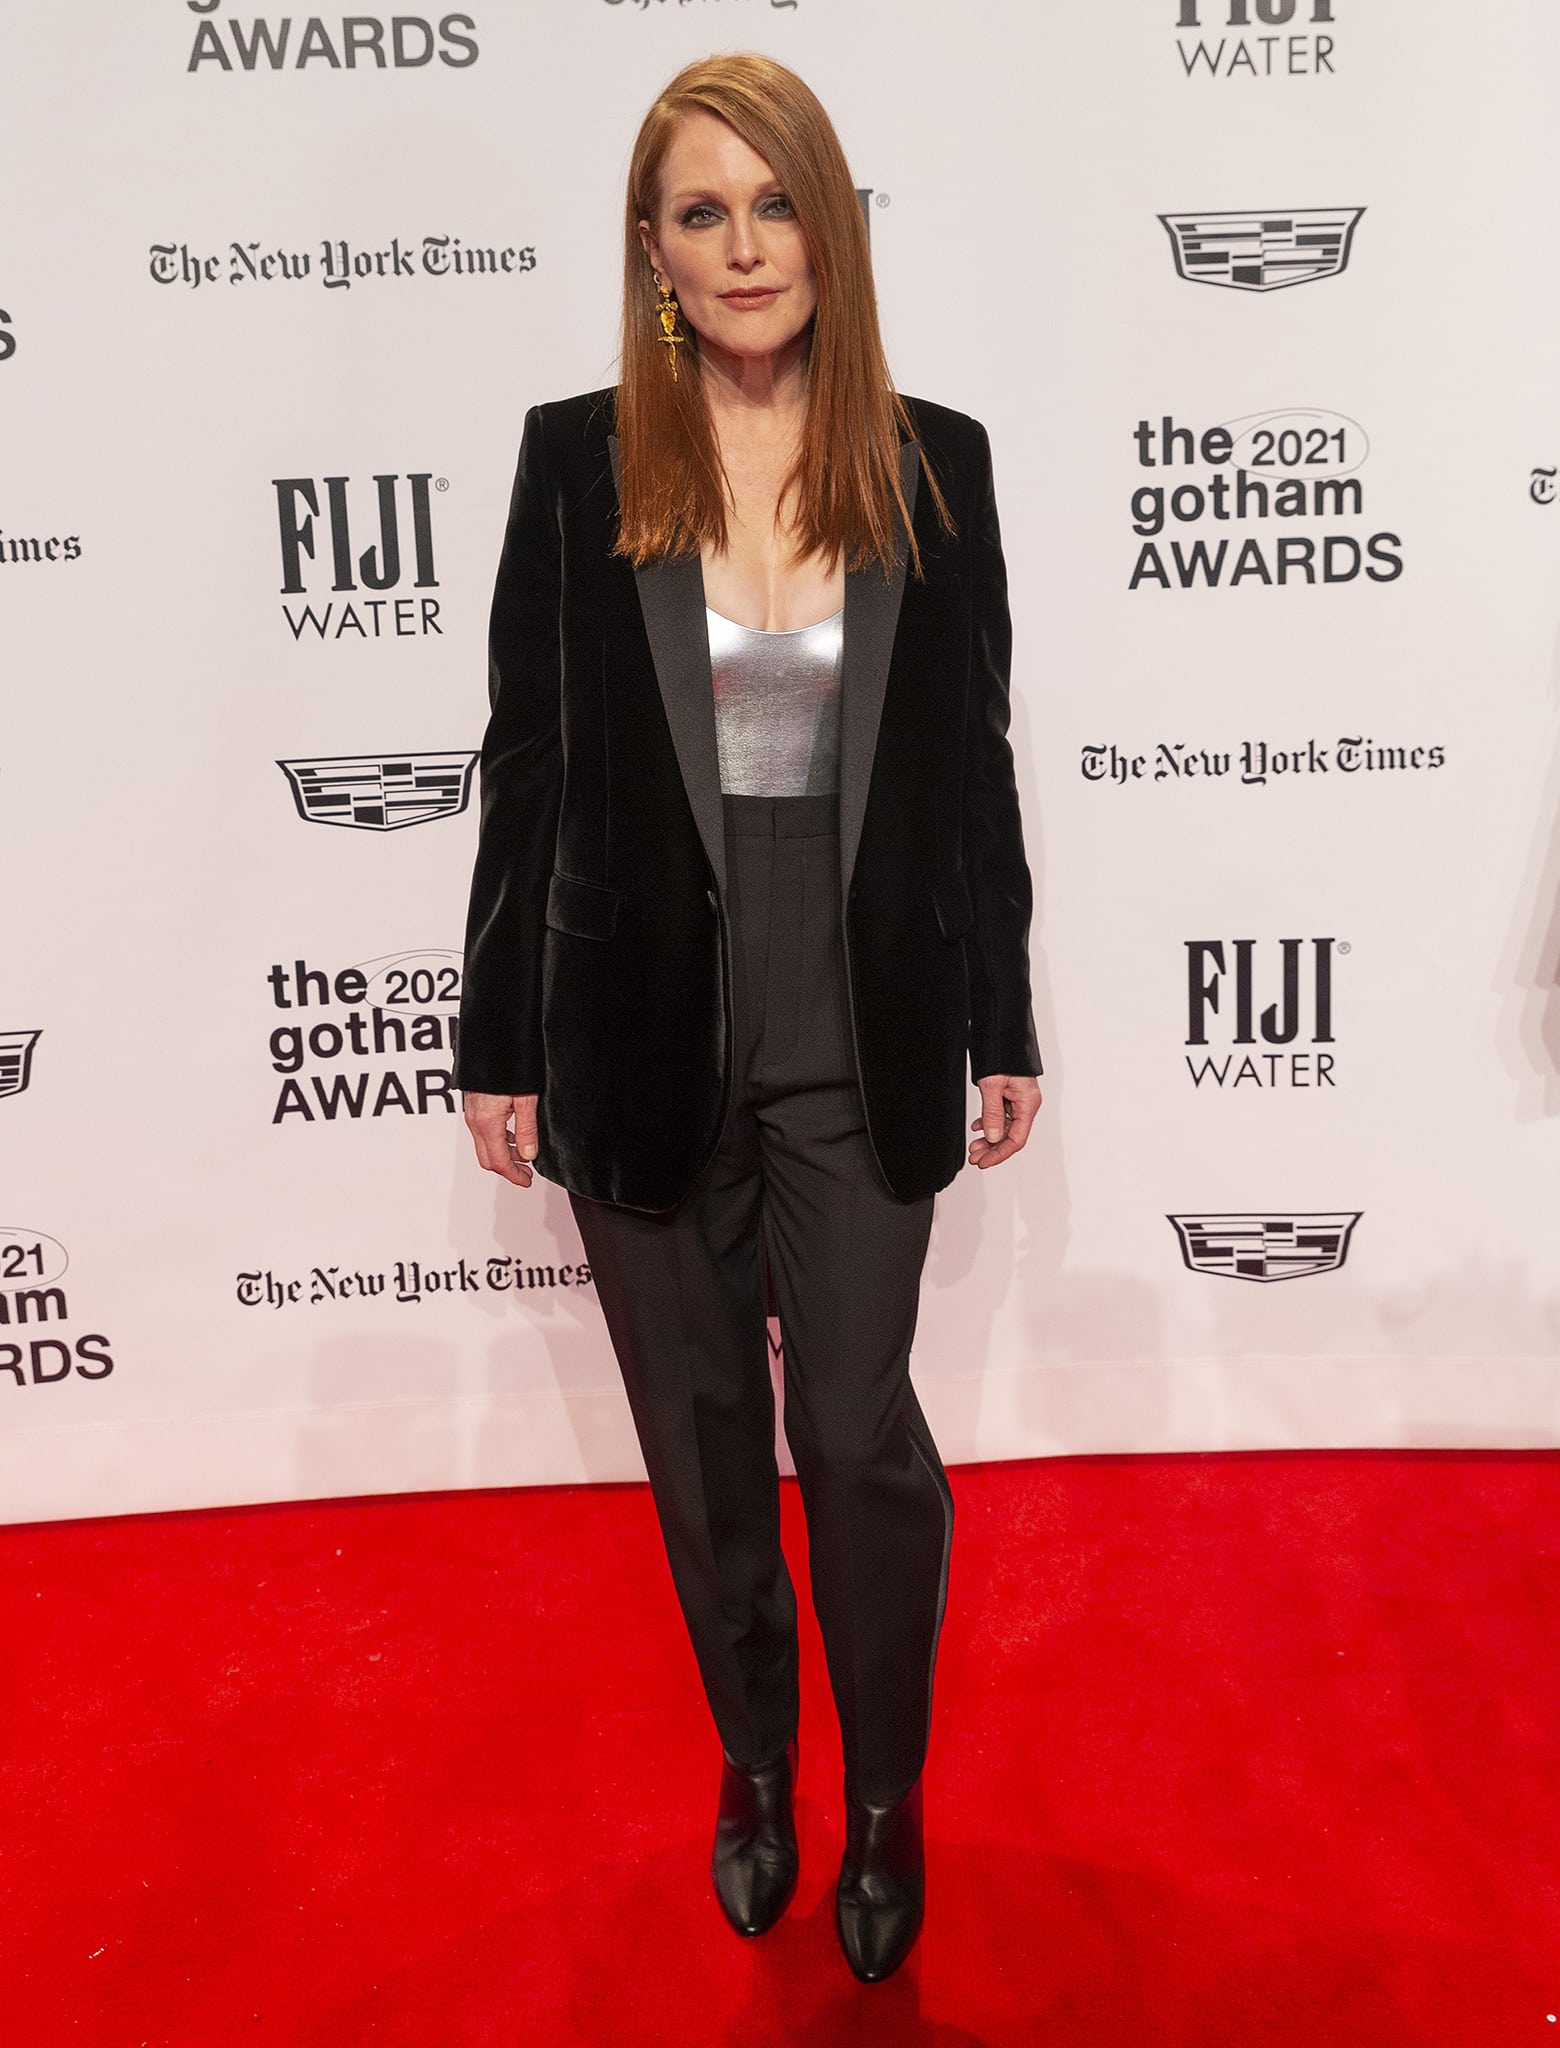 Julianne Moore flashes her cleavage in a Saint Laurent silver top and a black velvet blazer